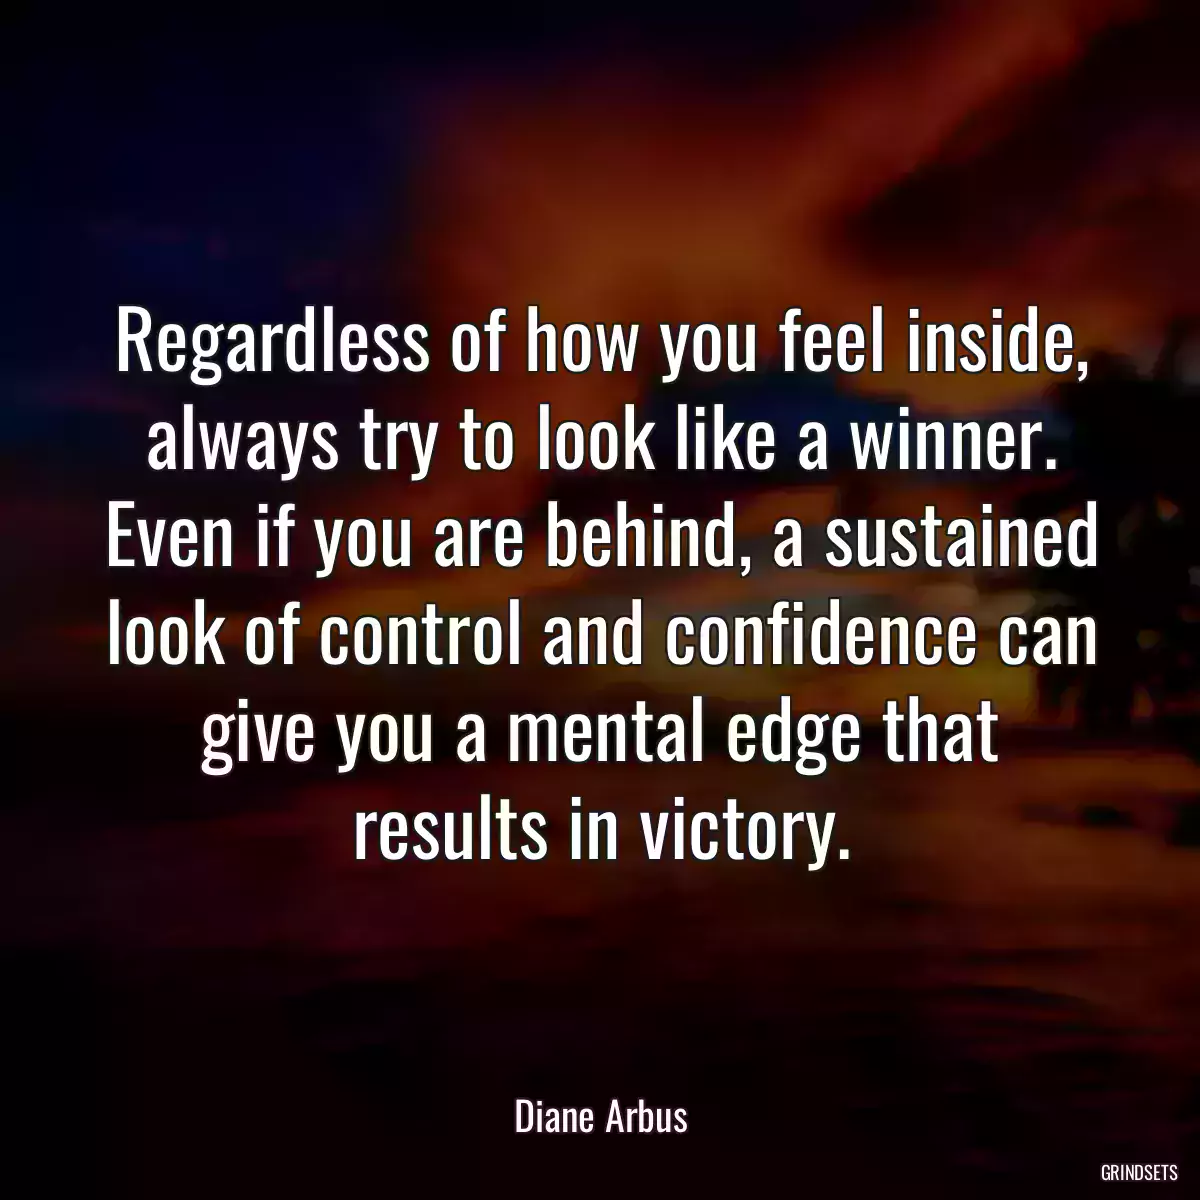 Regardless of how you feel inside, always try to look like a winner. Even if you are behind, a sustained look of control and confidence can give you a mental edge that results in victory.